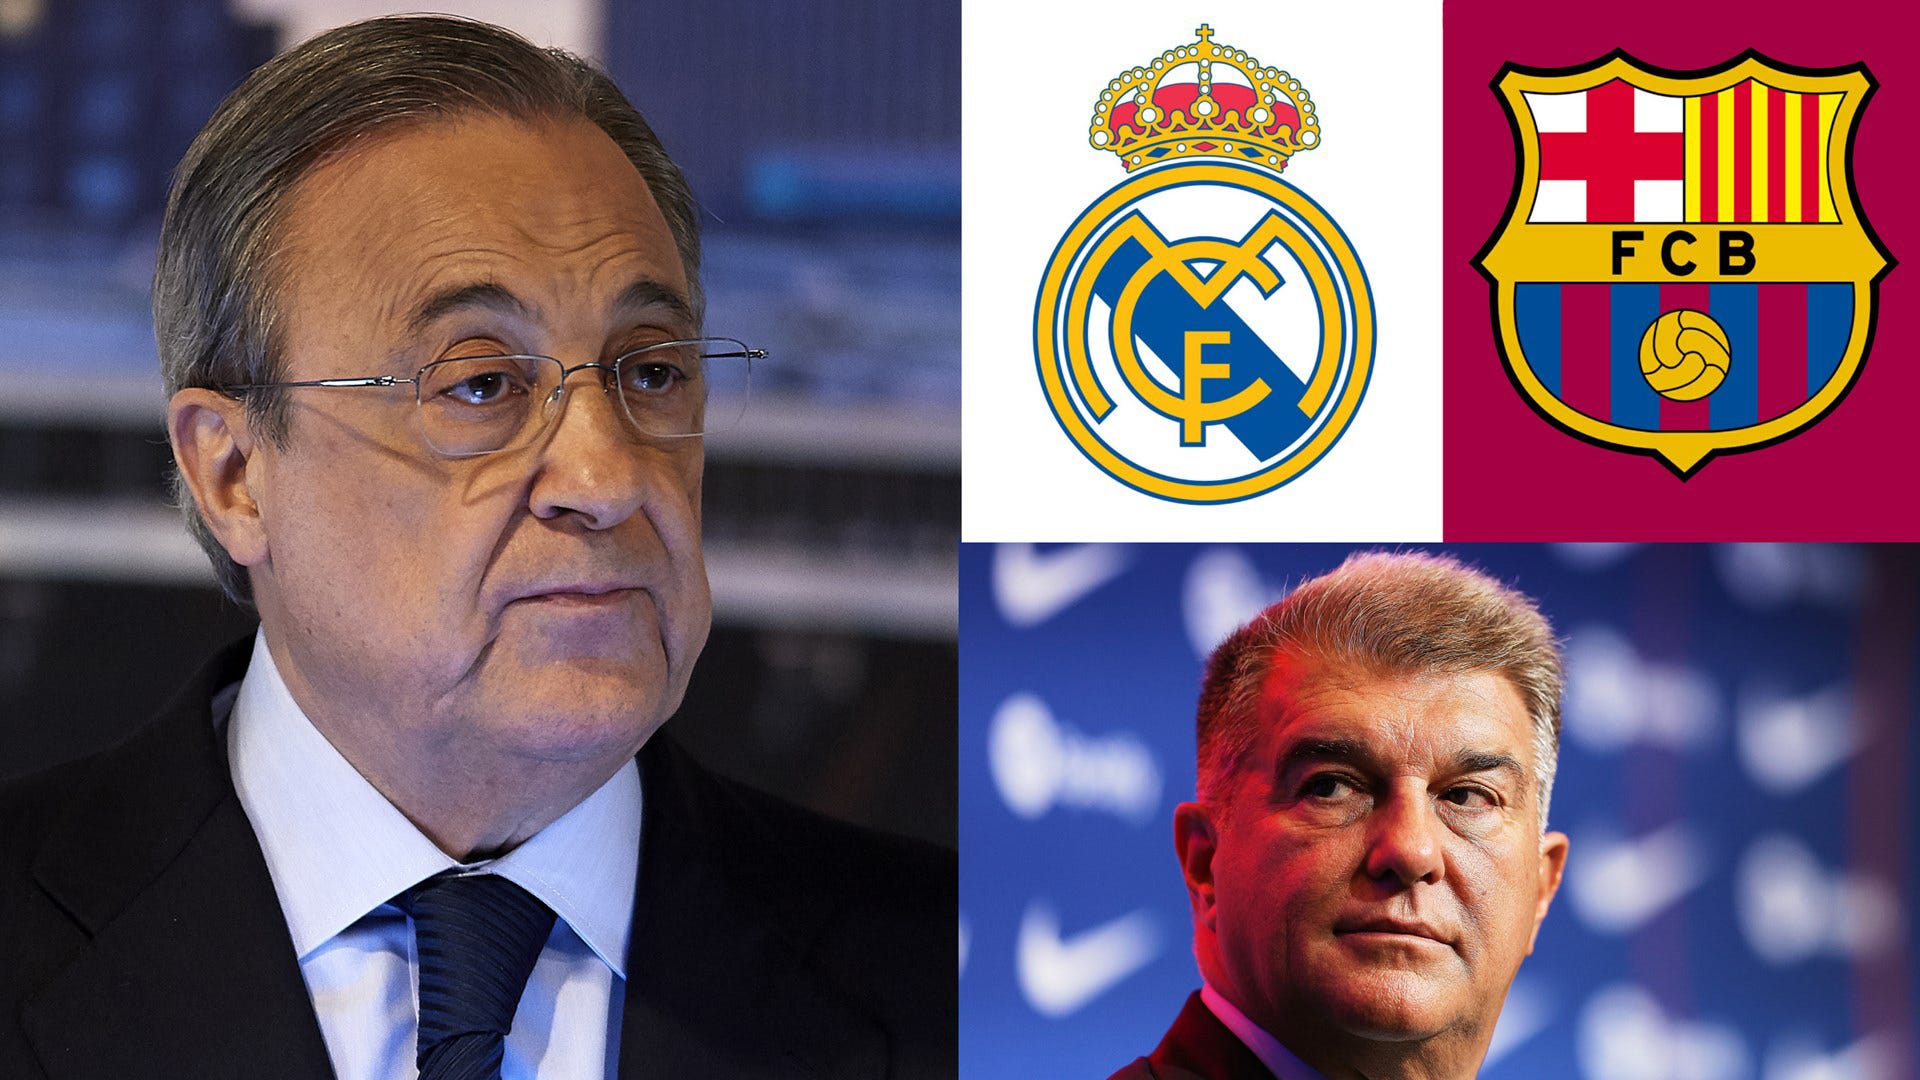 Real Madrid take aim at Barcelona with extraordinary four-minute video in response to Joan Laporta’s ‘club of the regime’ comments | Goal.com UK